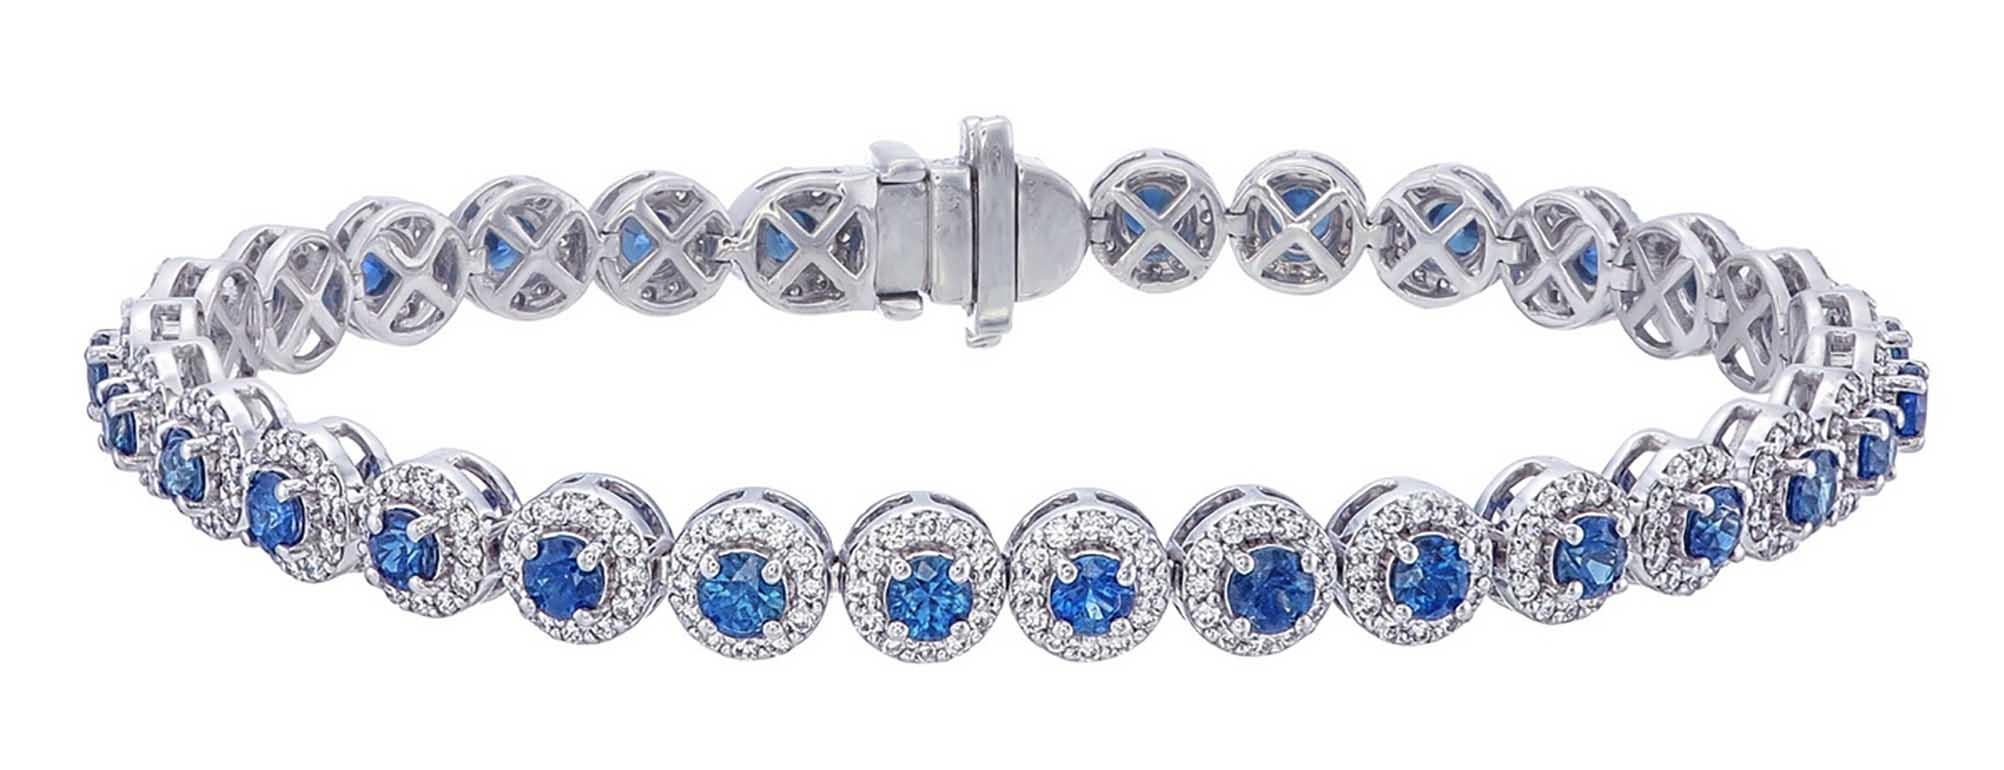 Brilliant Cut Tennis bracelet with Blue sapphire and a halo of diamond all around  For Sale